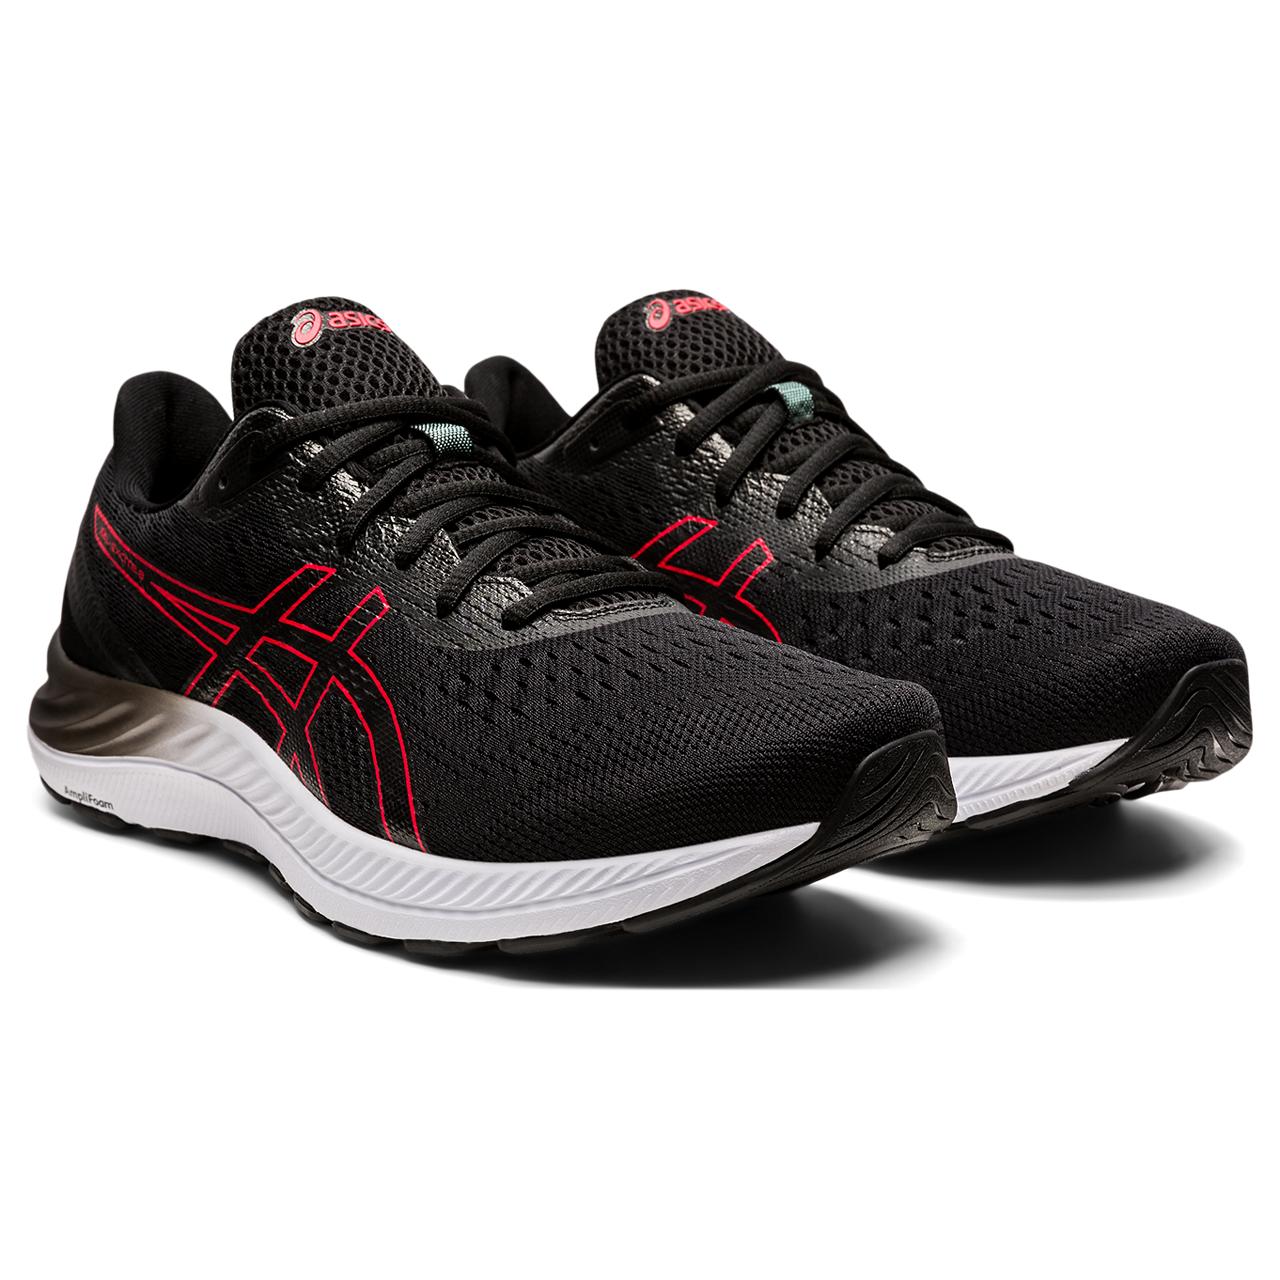 CHAUSSURE ASICS GEL EXCITE 8 HOMME